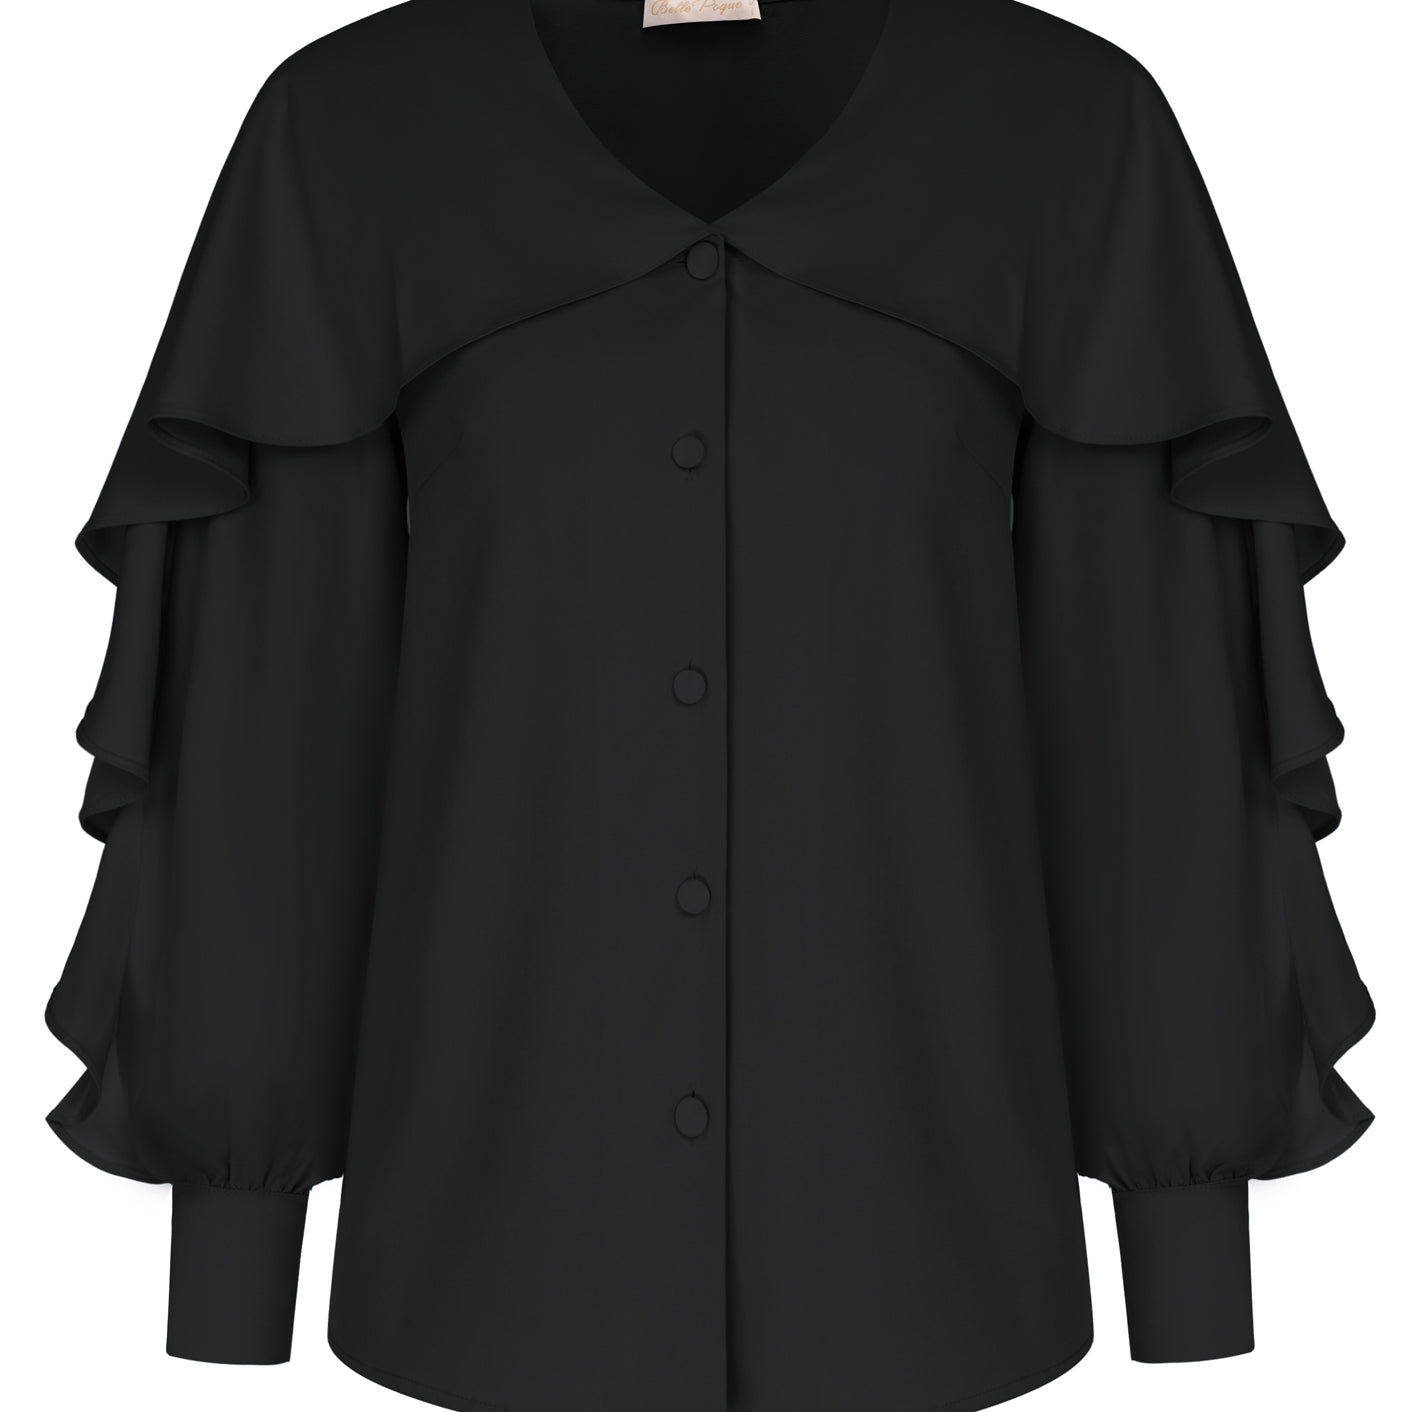 Seckill Offer⌛Ruffle Decorated Shirt Long Sleeve V-Neck Button-up Tops